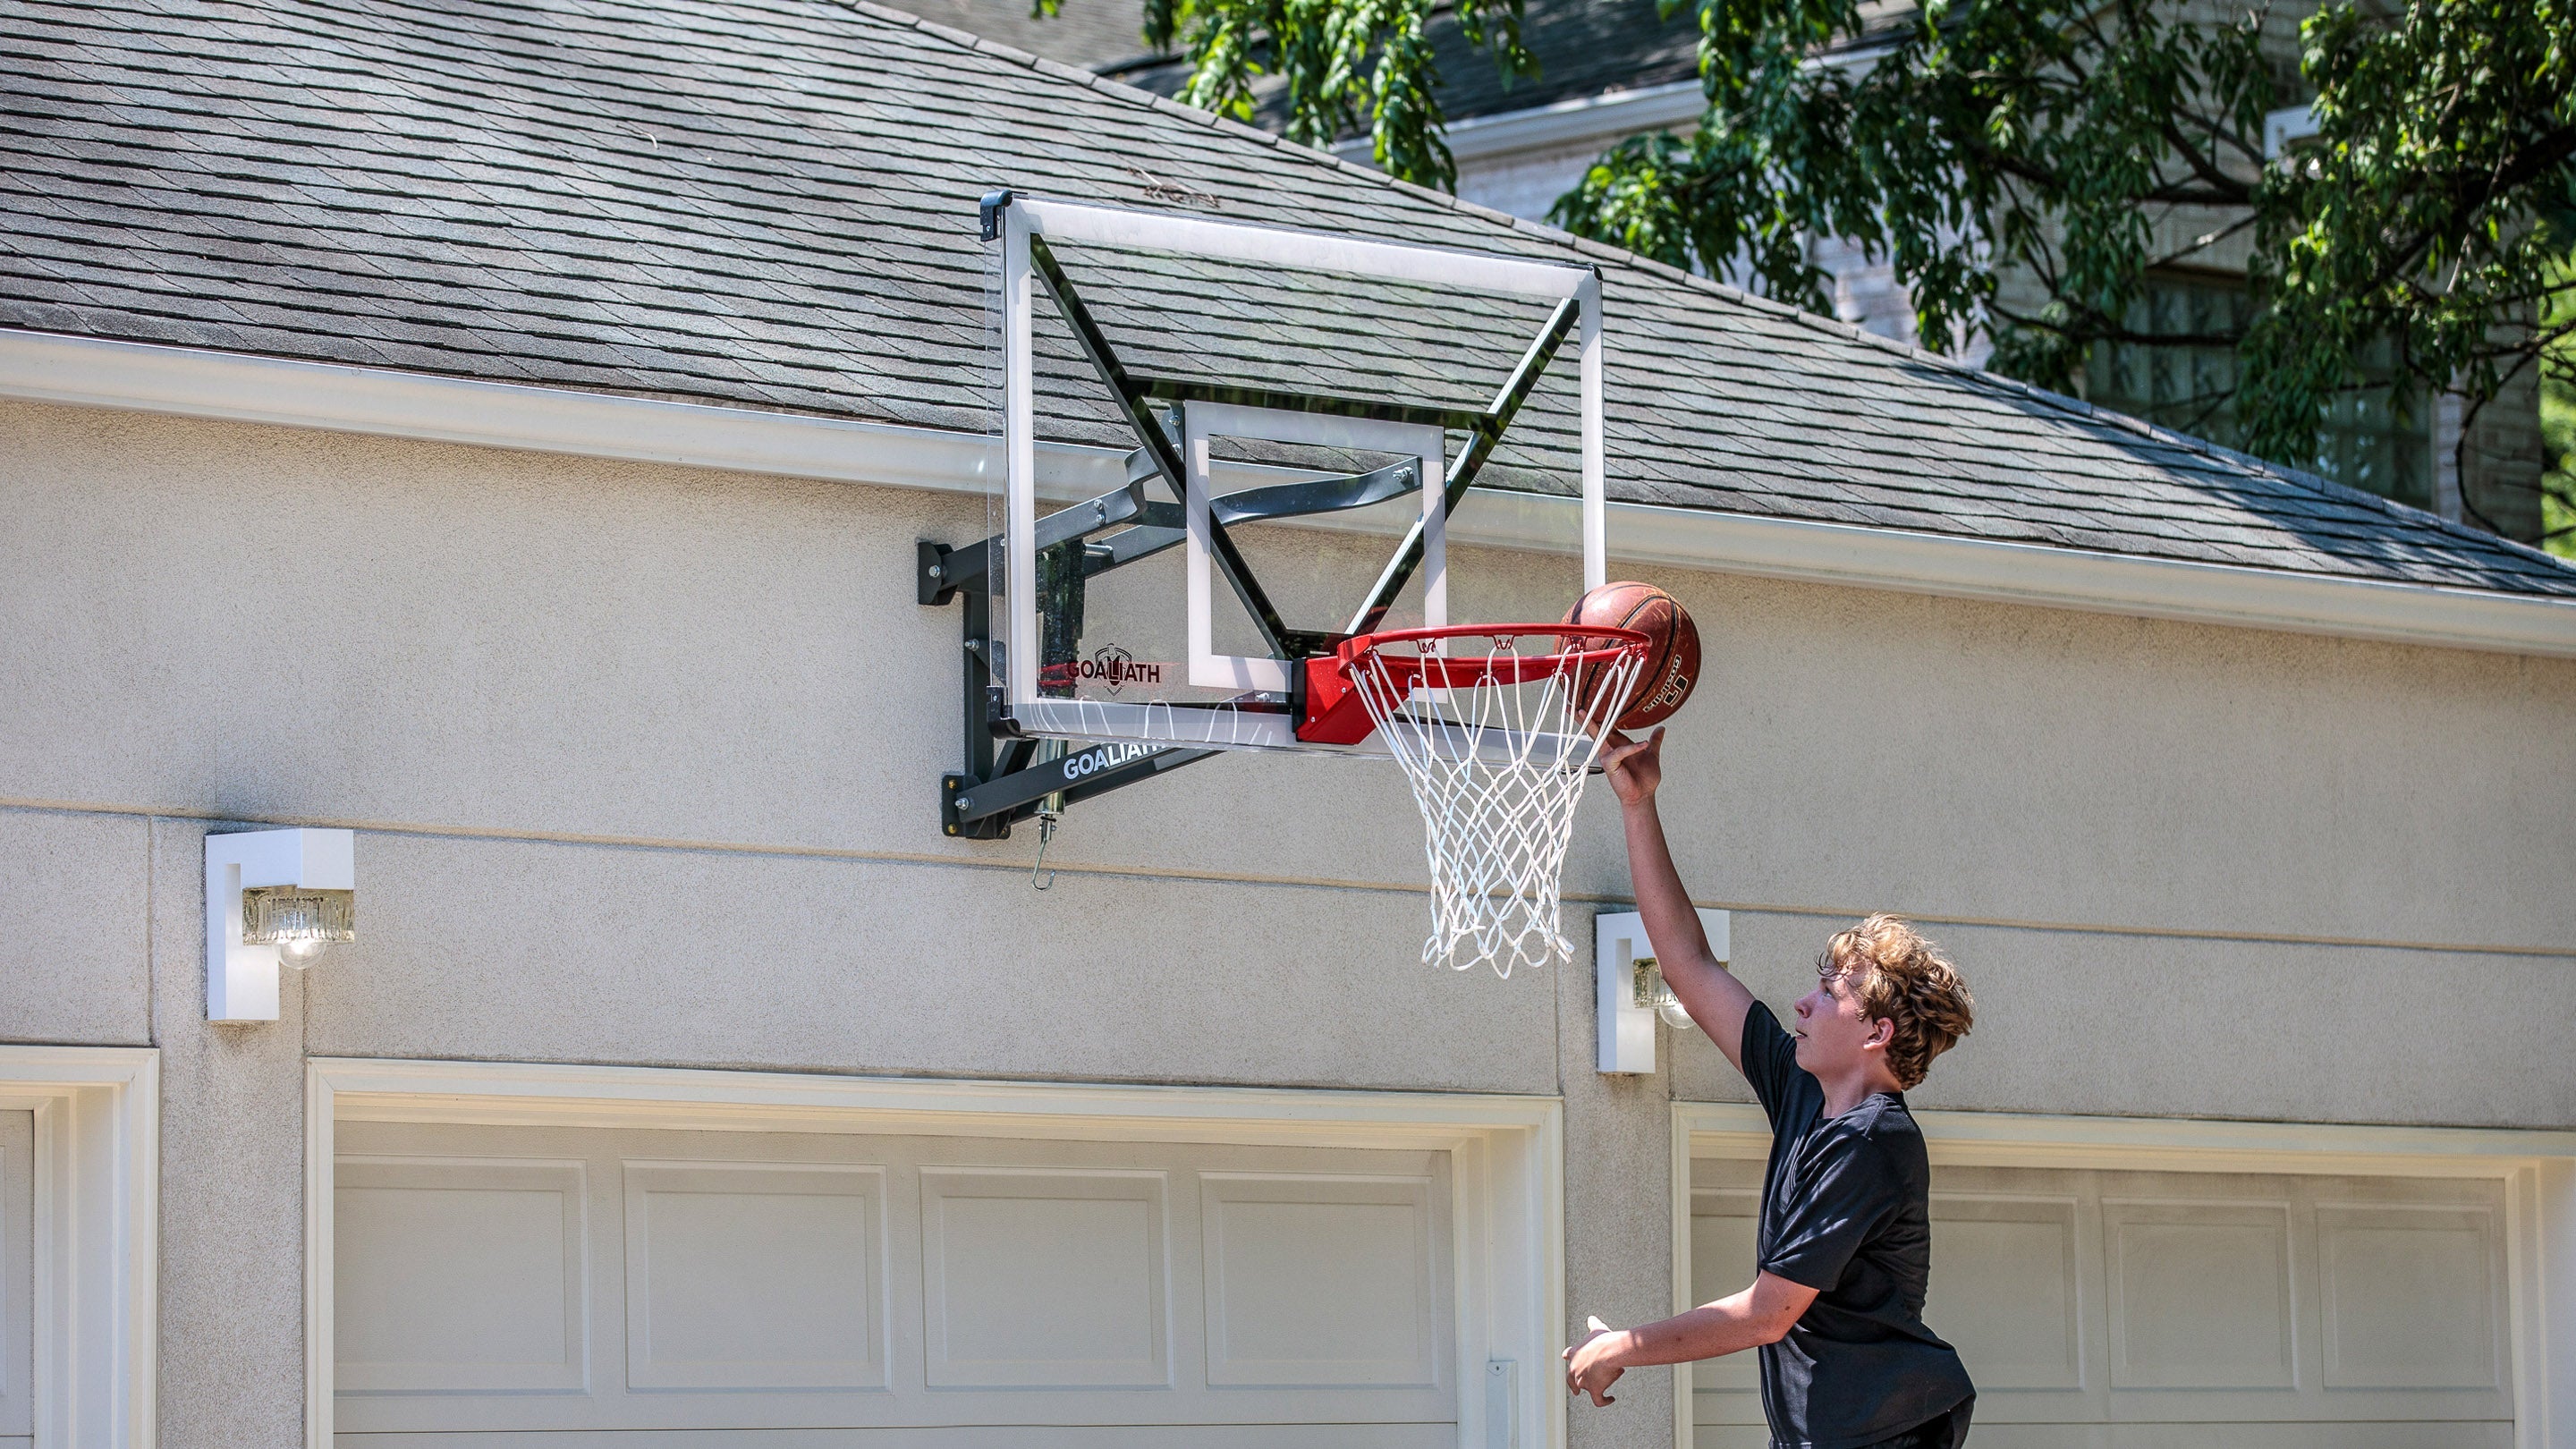 New Mini Basketball Hoop for Indoor with Ball For Home Door Hang Hanging  Wall